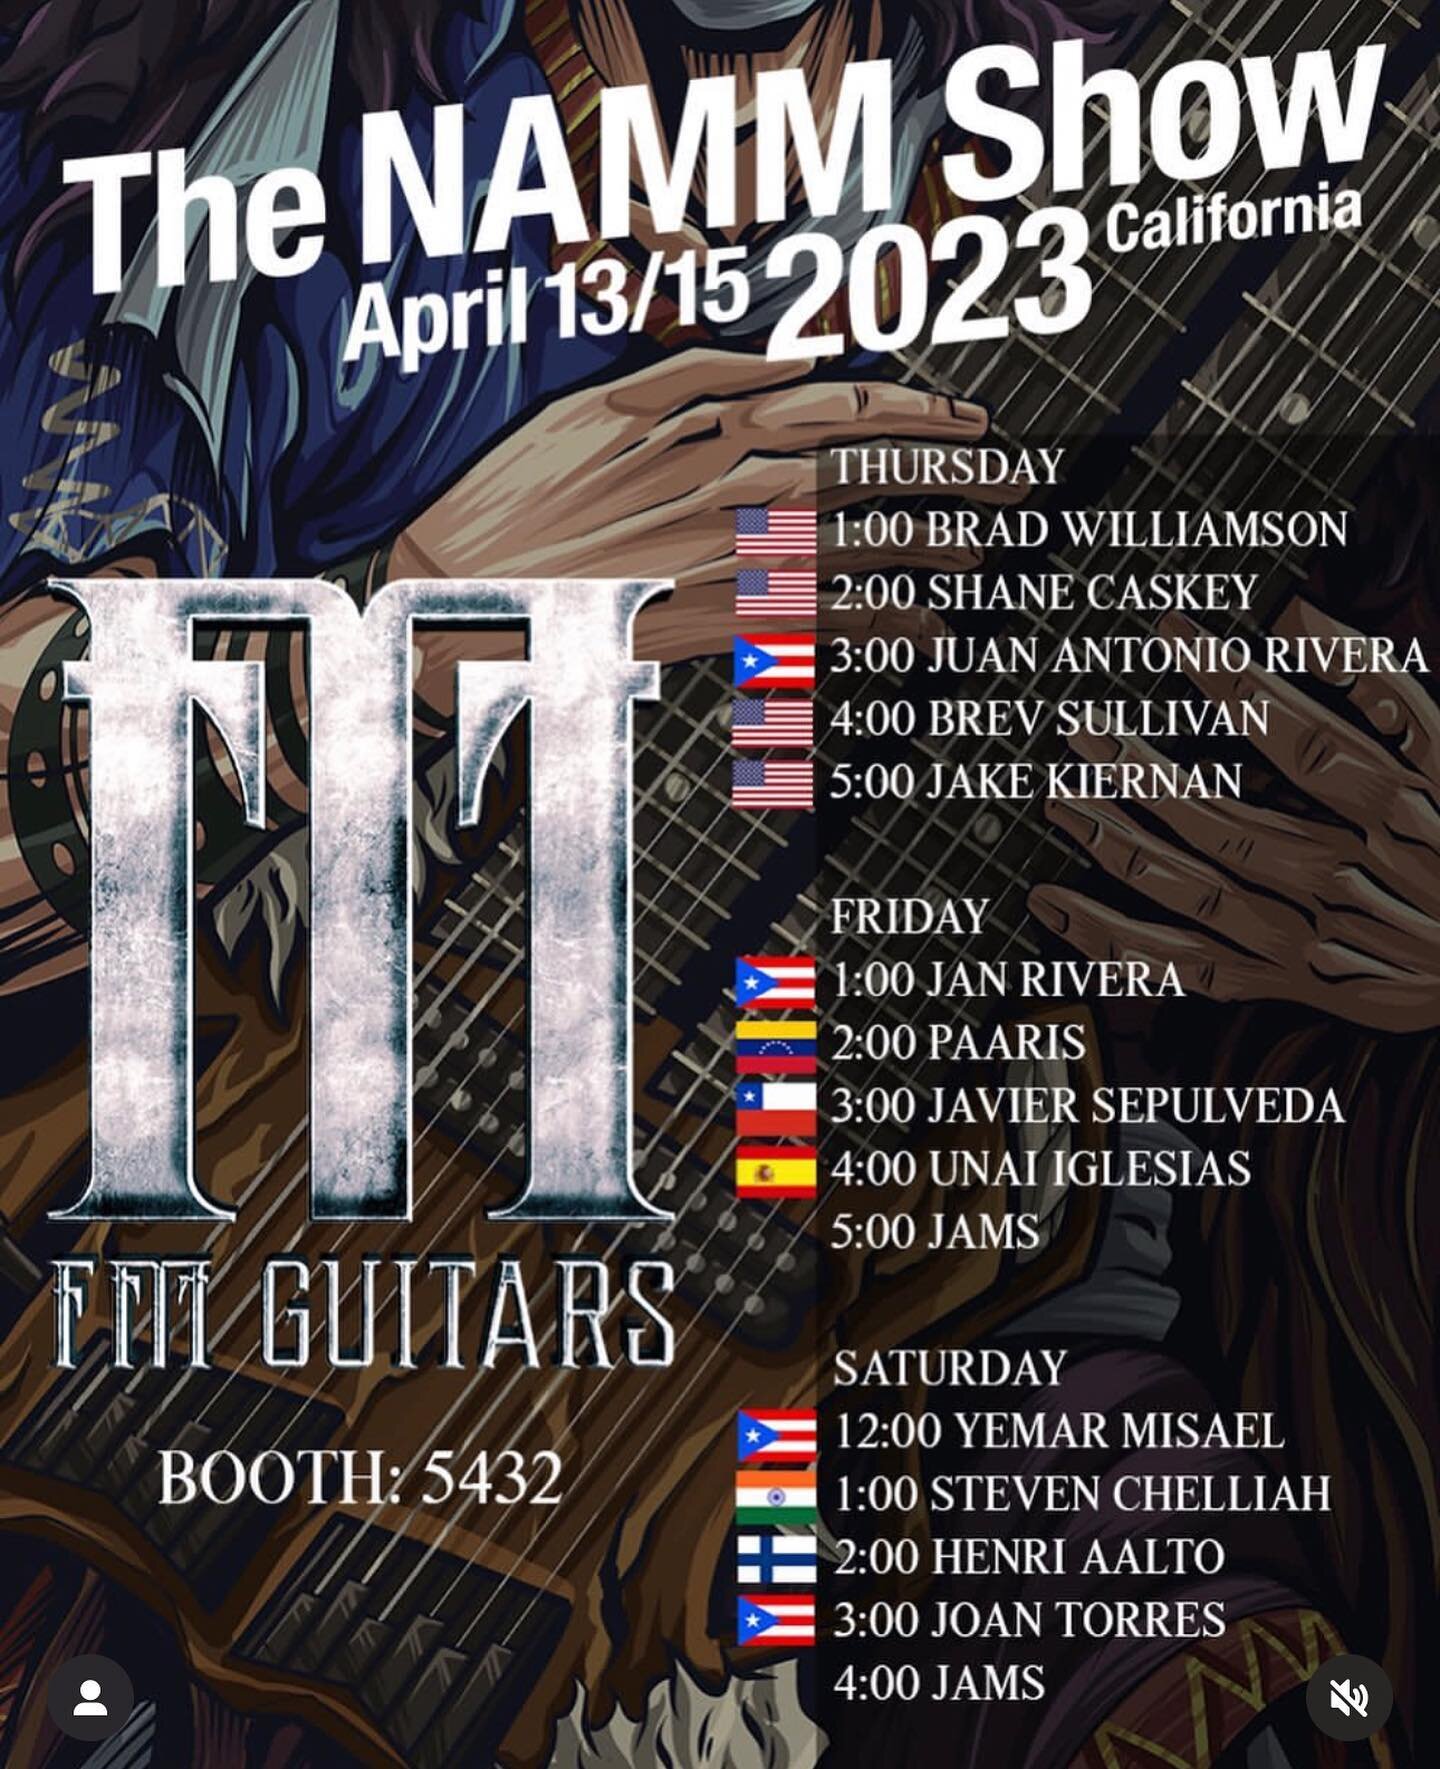 For my friends at NAMM today, check out my bro-in-law @stevenchelliah at the @fmguitarsofficial booth today at 1pm PDT showcasing his amazing custom double-neck fretless/fretted guitar and original @fuzasian music #namm2023 #fmguitars #booth5432 #ste